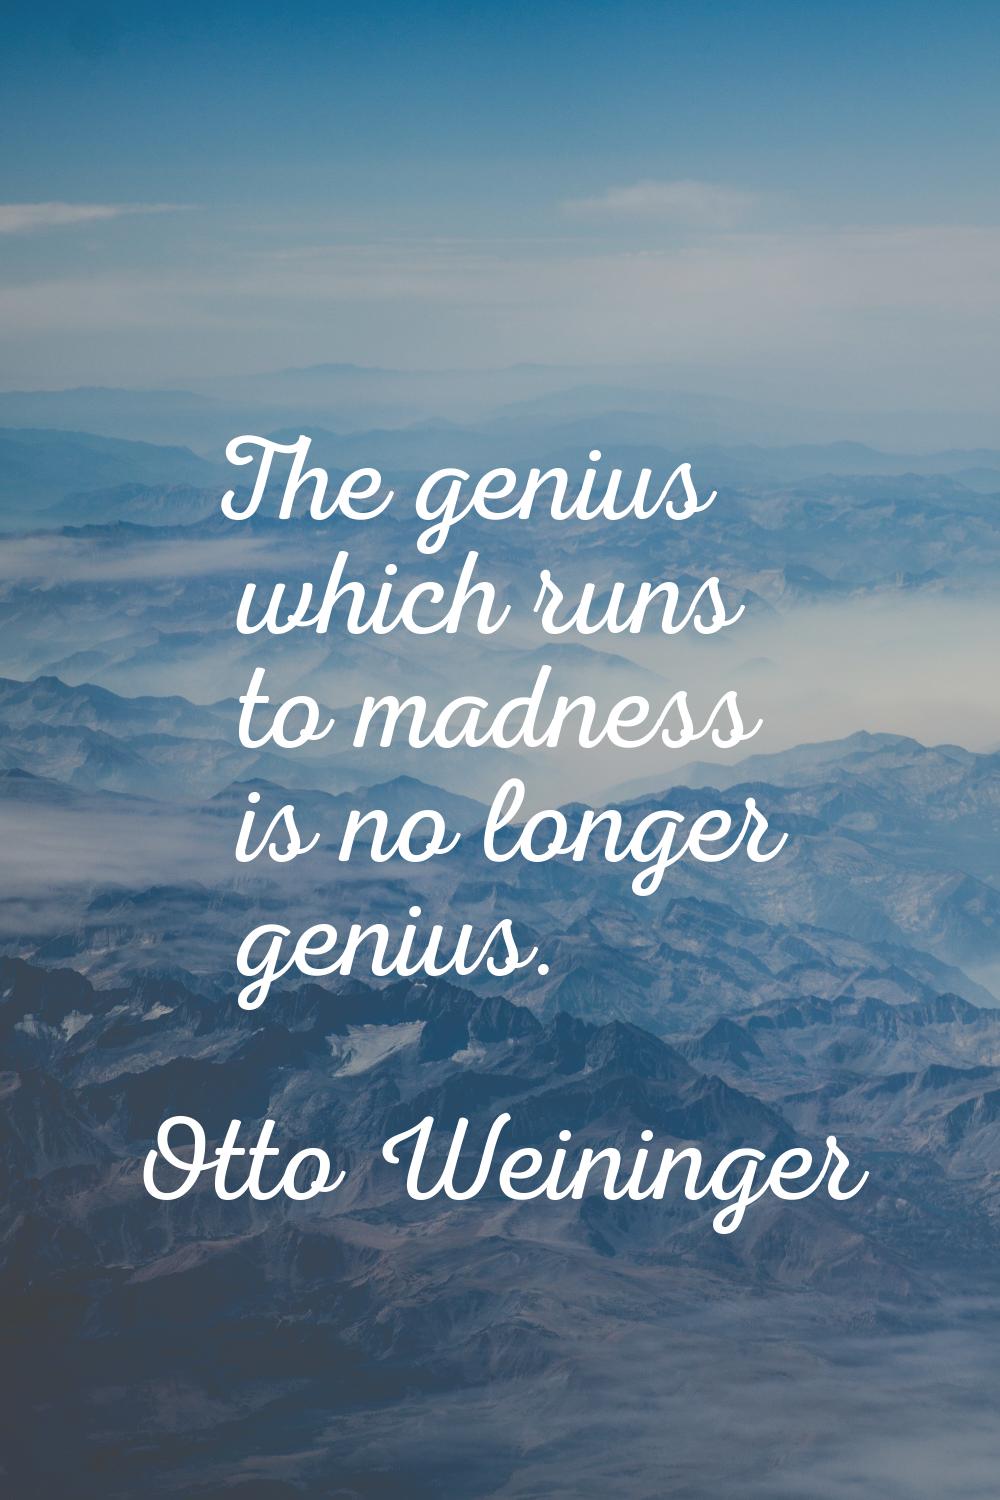 The genius which runs to madness is no longer genius.